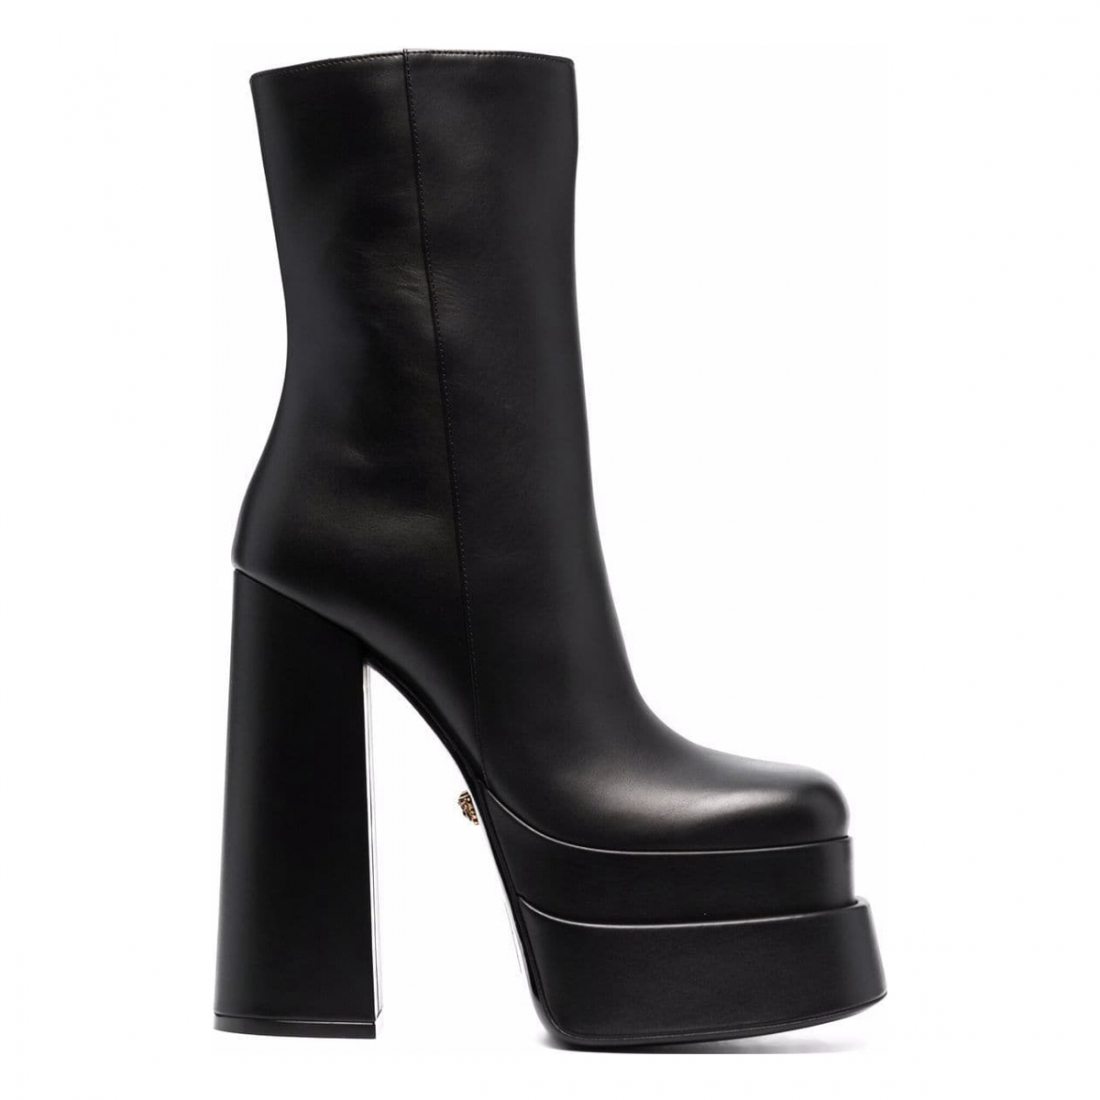 Women's 'Thick' High Heeled Boots